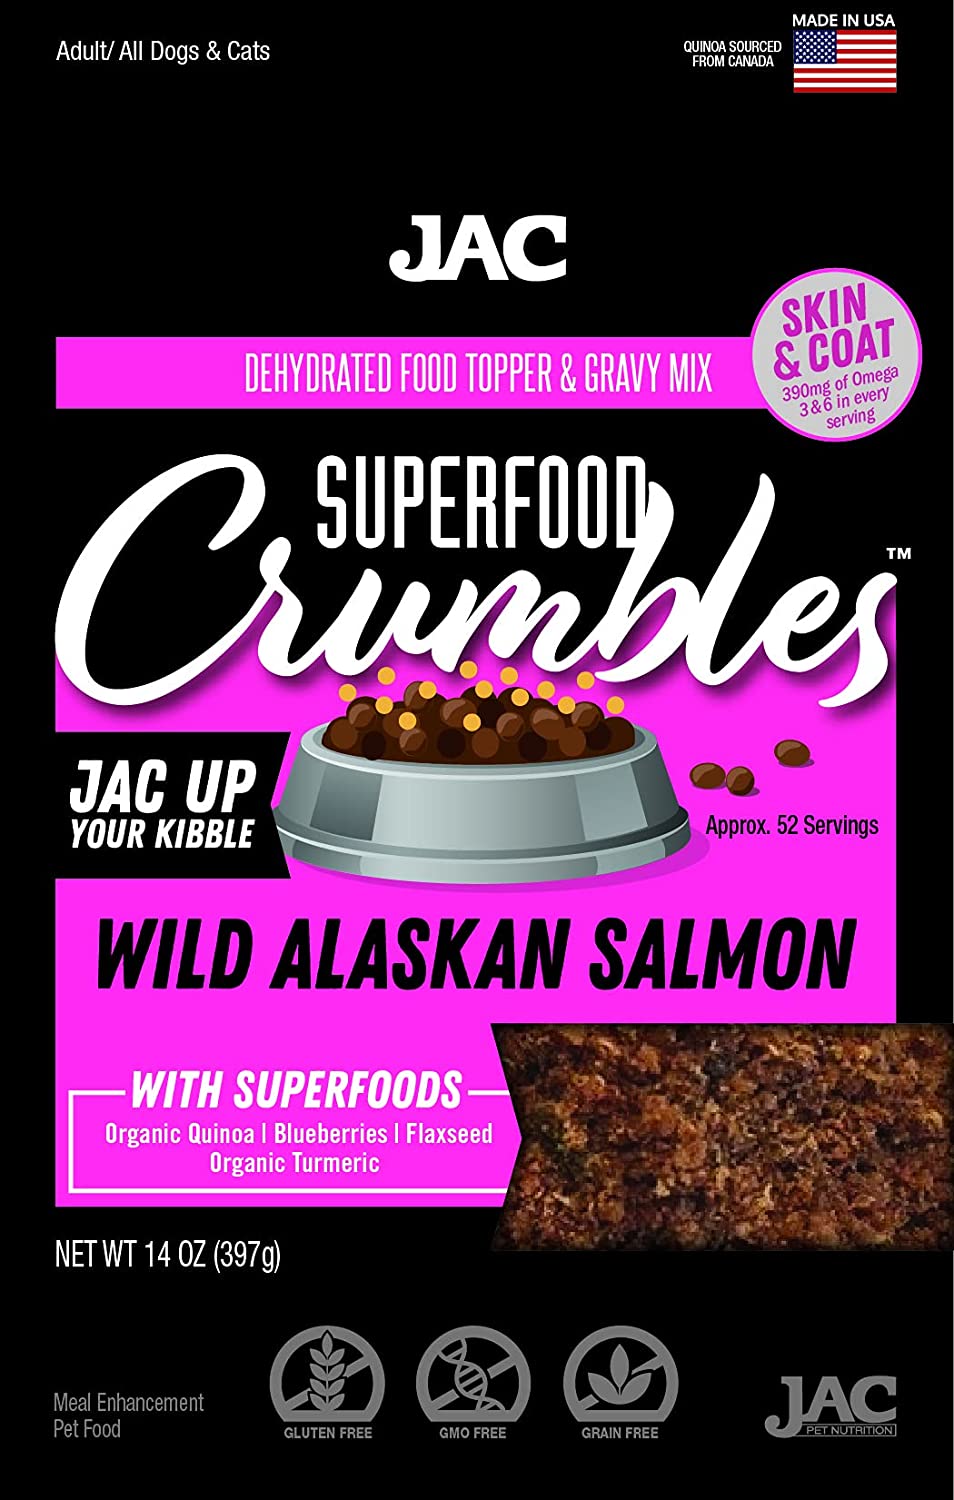 JAC Pet Nutrition Salmon Crumbles Dehydrated Dog Food Toppers - 8 oz  